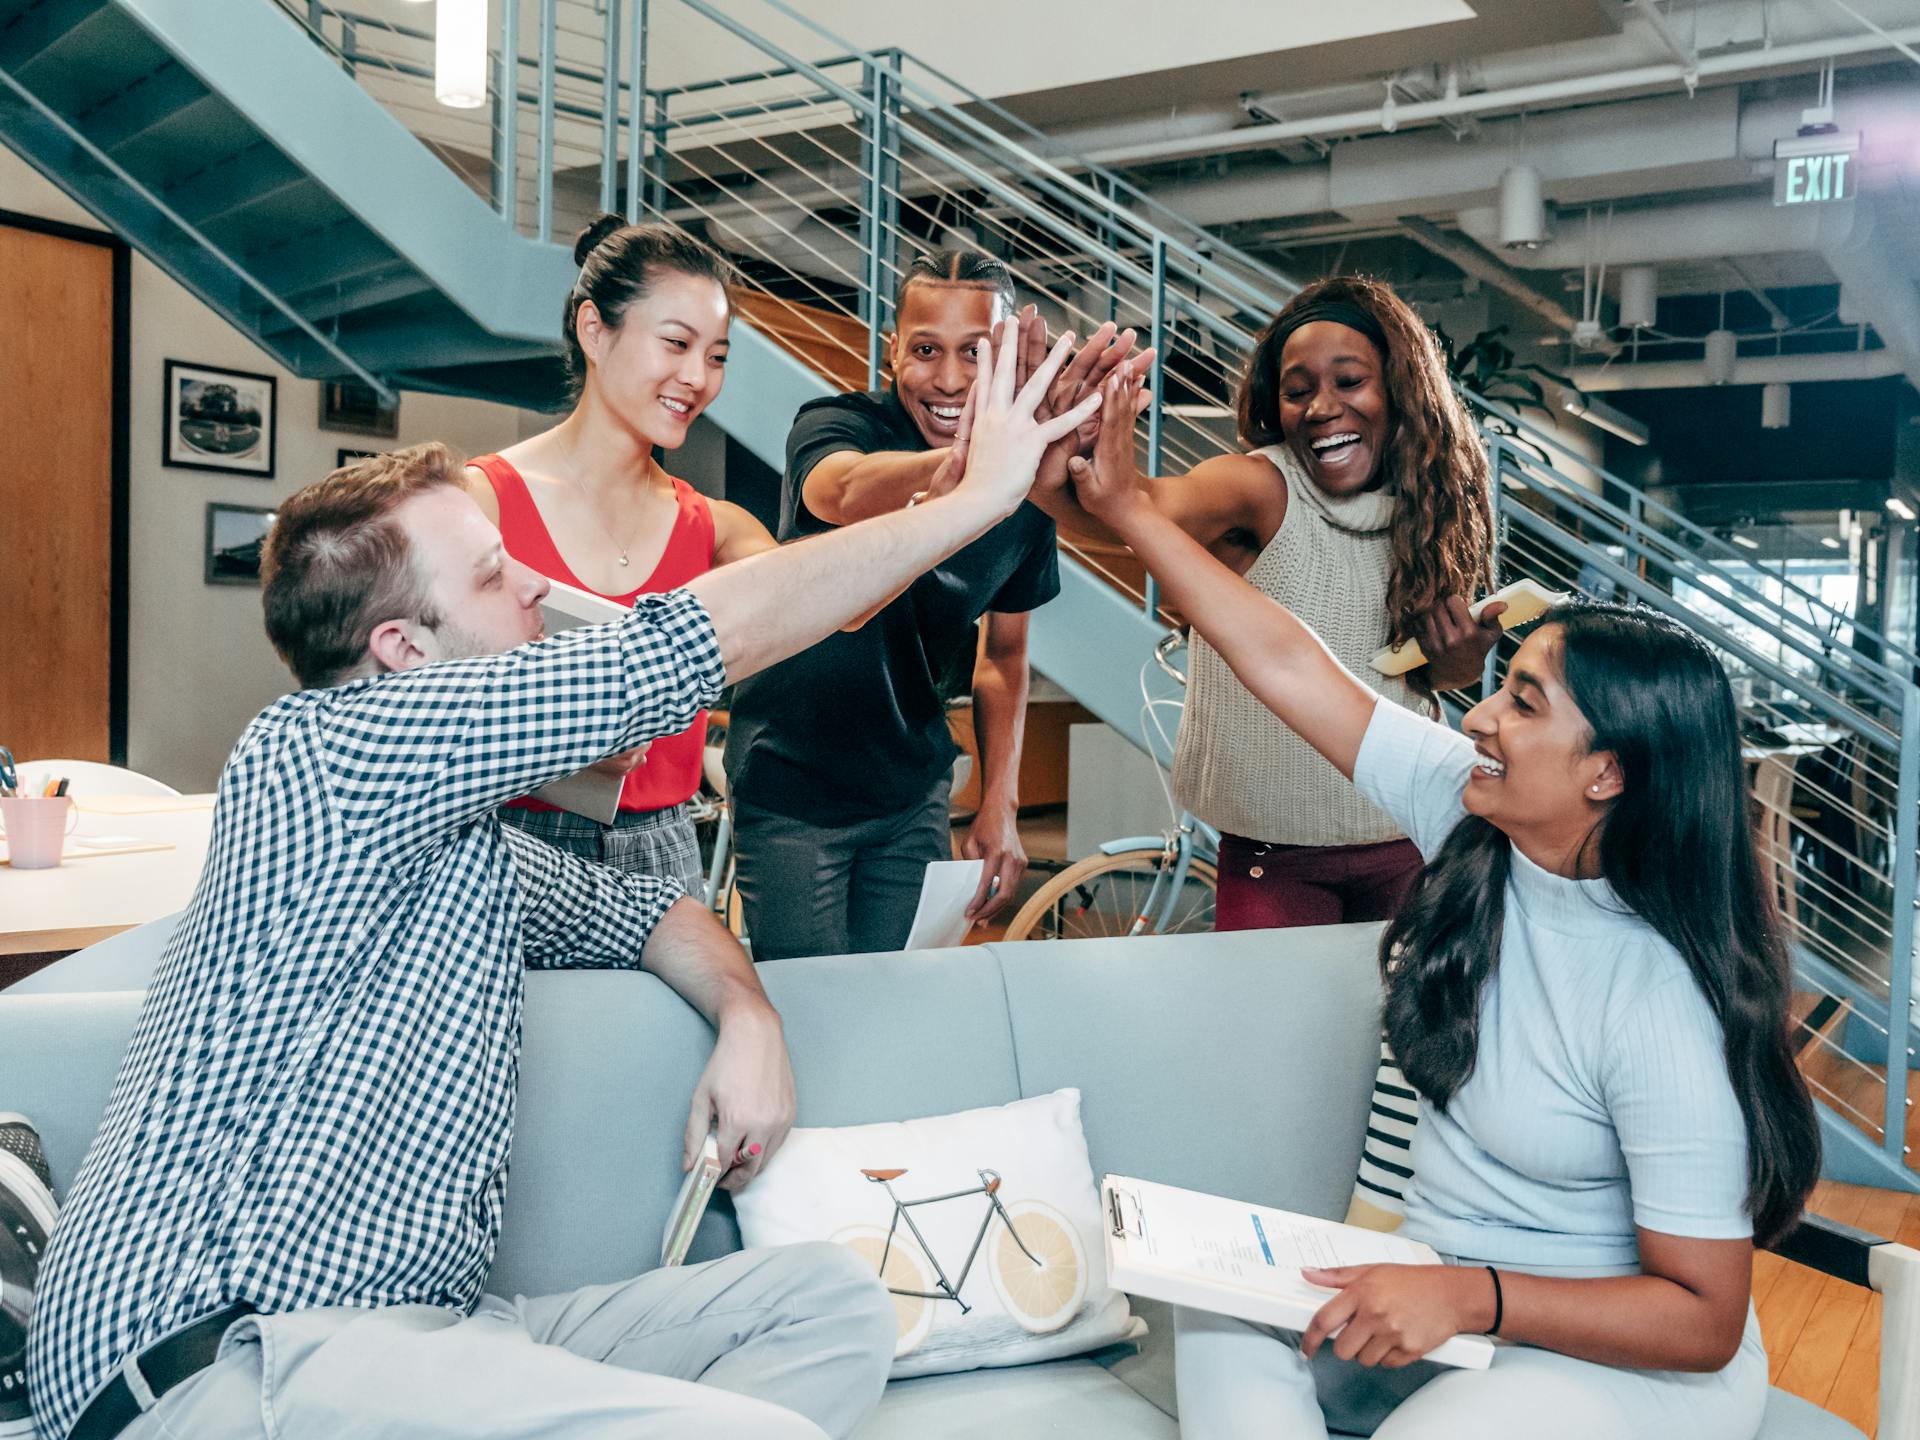 Office workers doing a high five | Source: Pexels